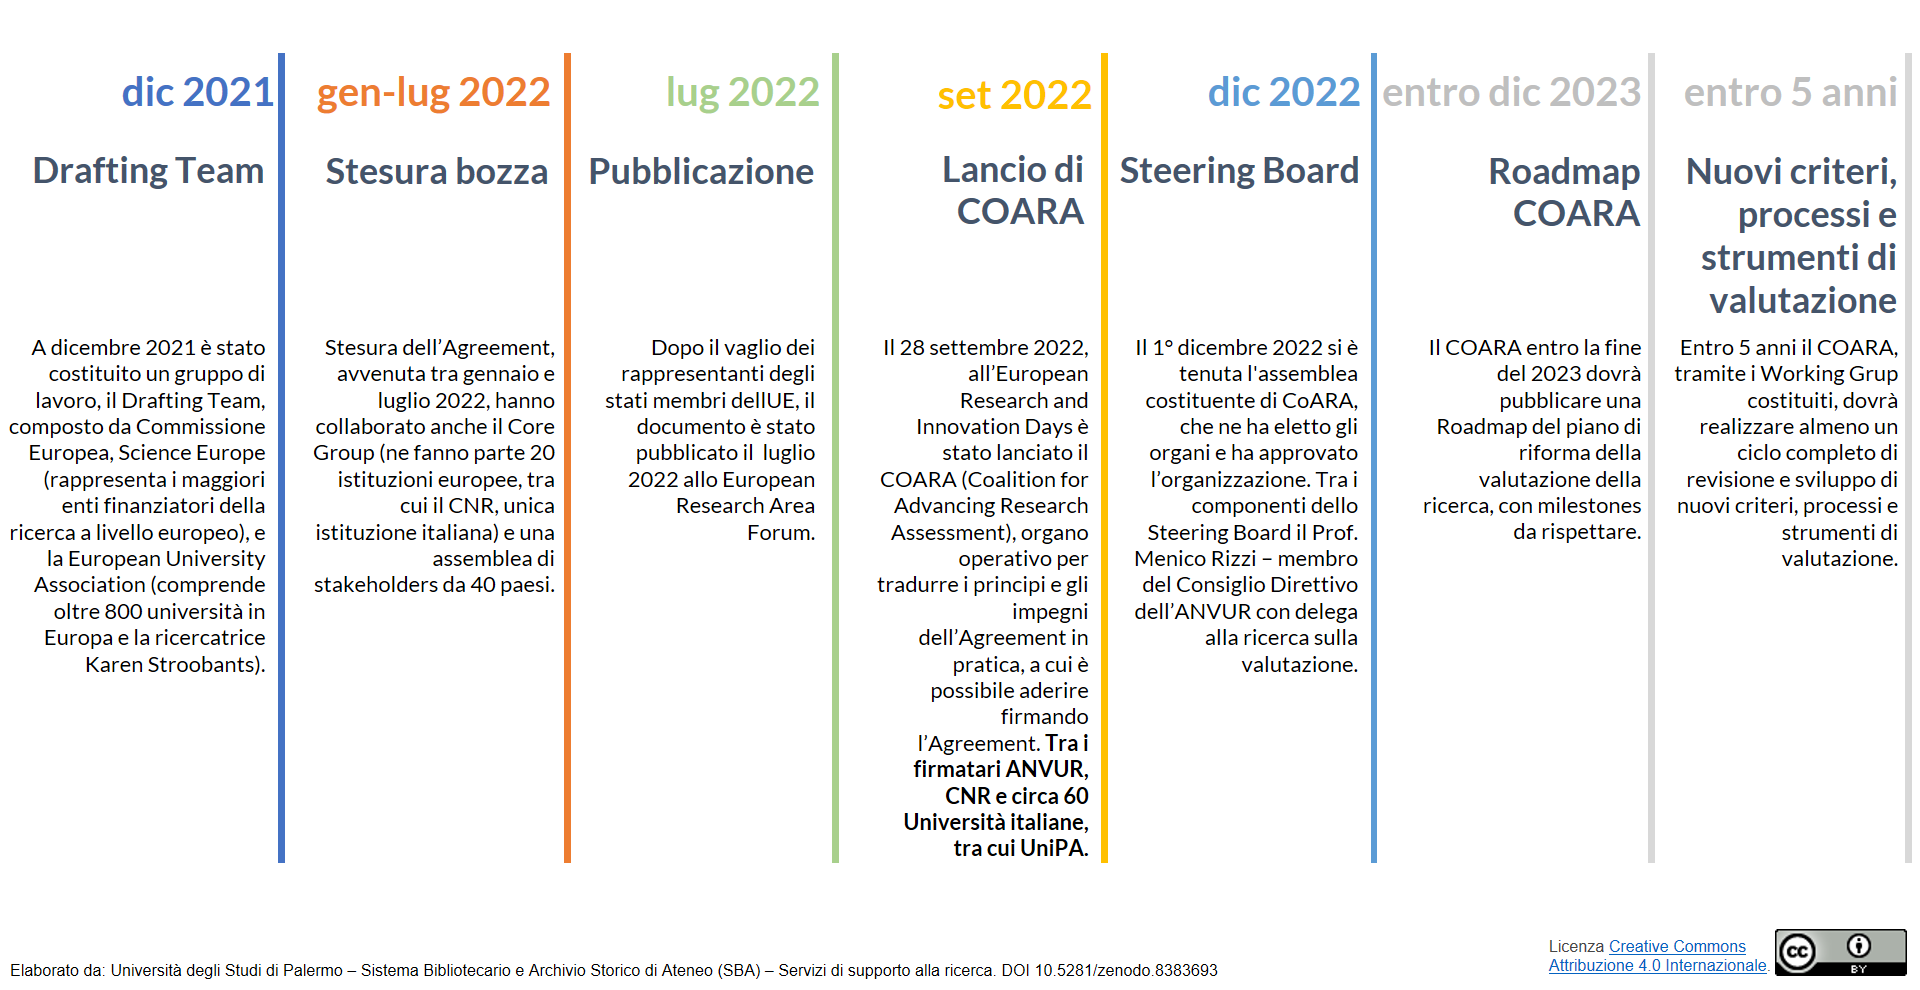 Genesi dell'Agreement On Reforming Research Assessment